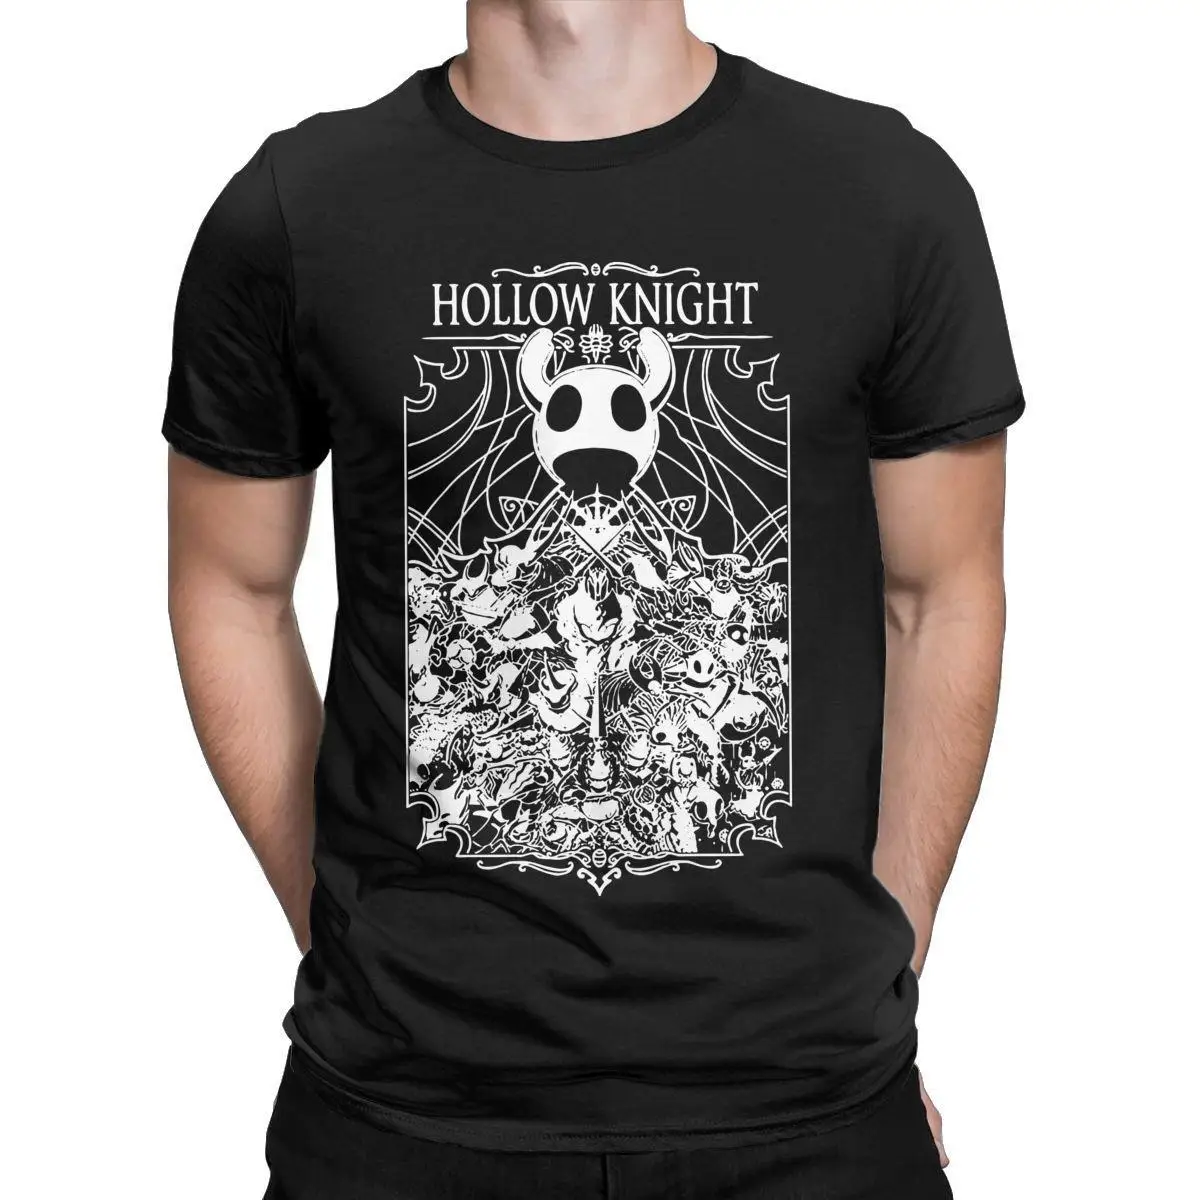 Hipster Hollow Knight Video Game T-Shirt for Men Round Neck Cotton T Shirt Short Sleeve Tees Printing Clothes